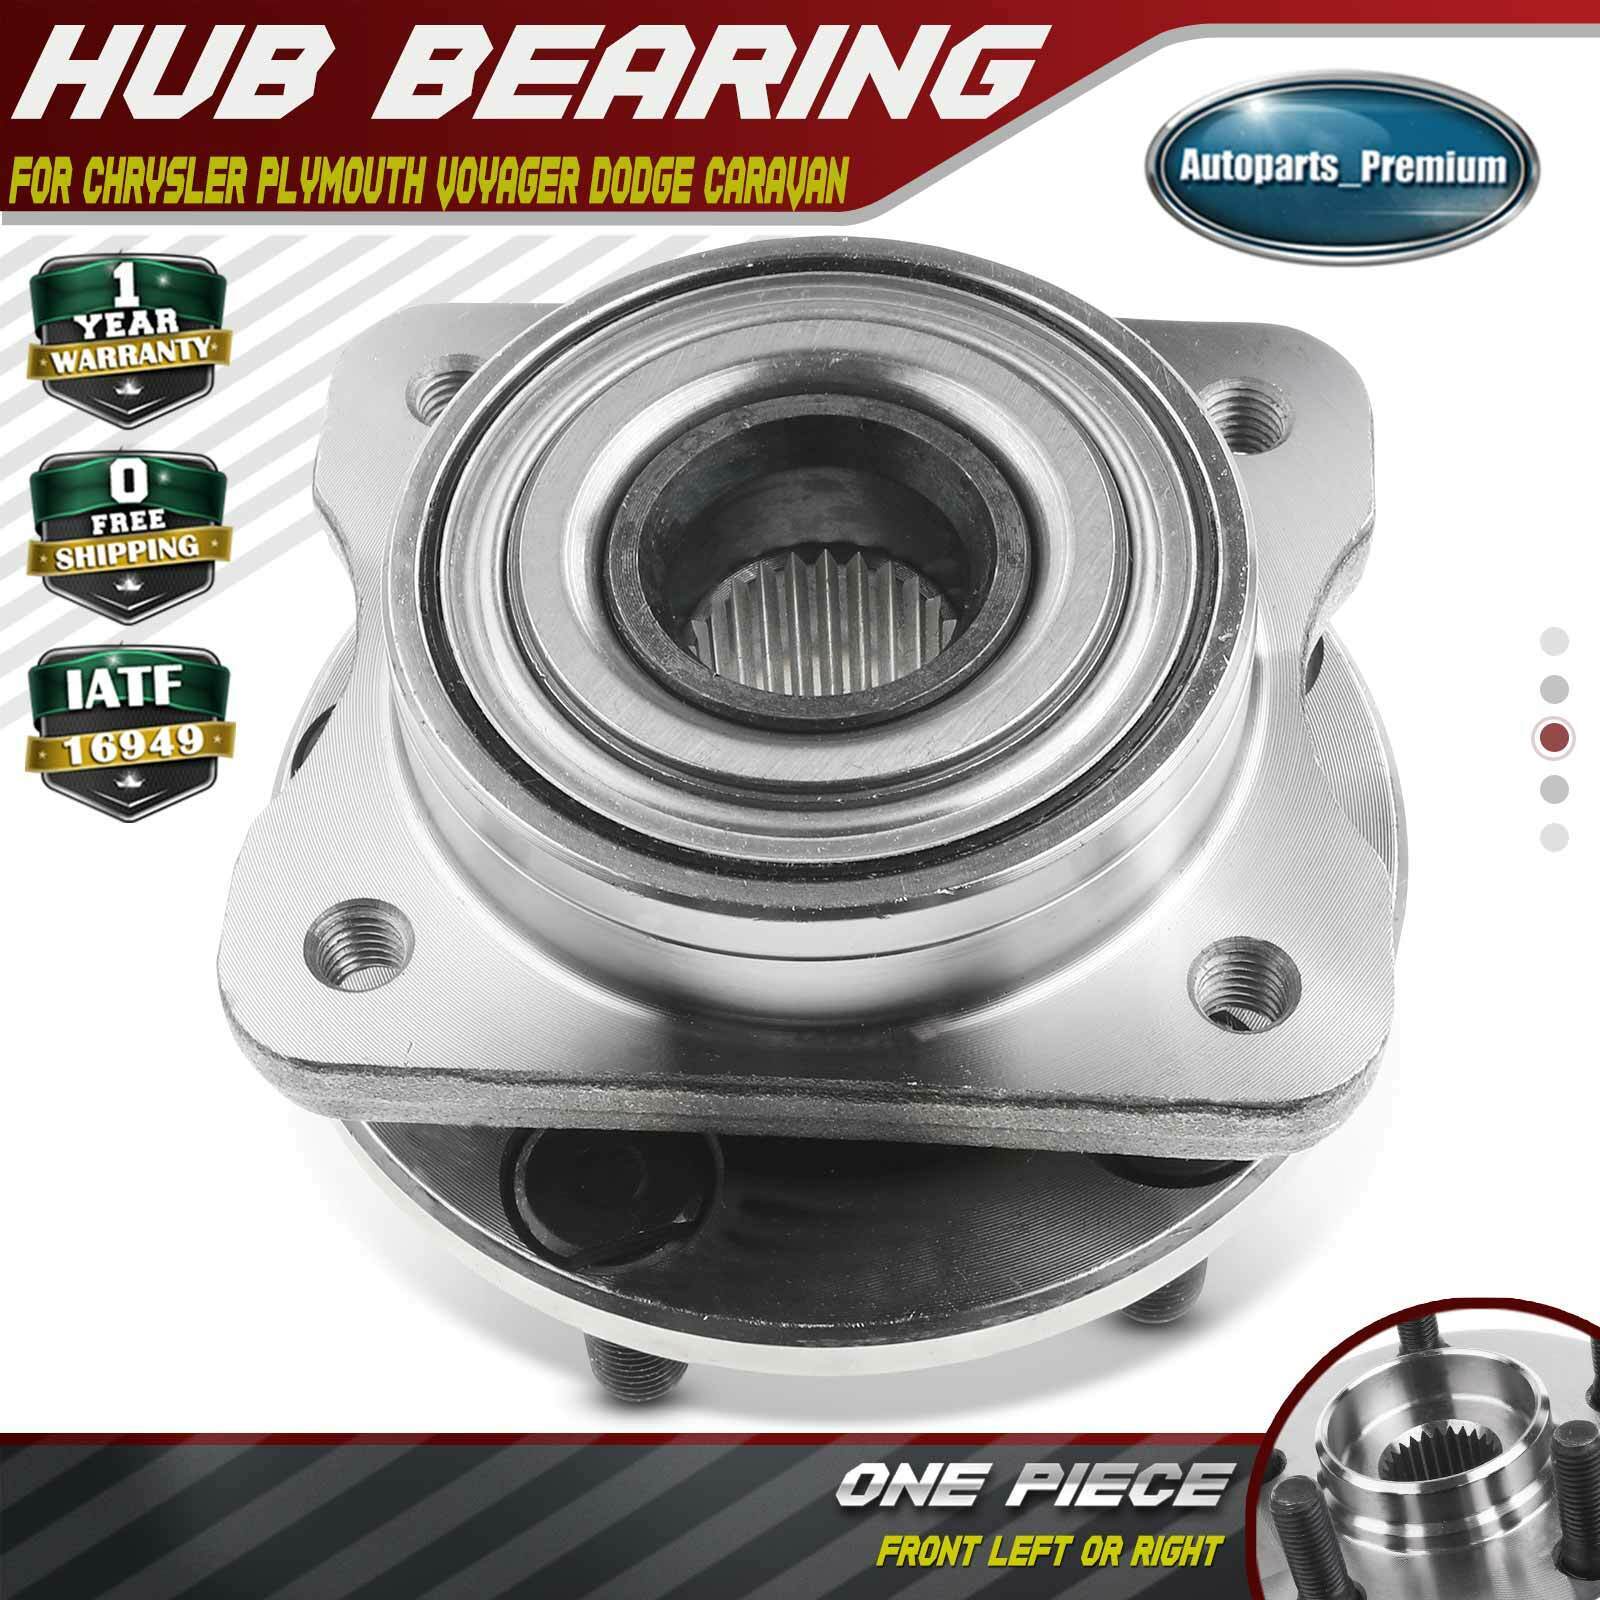 1x Front Wheel Hub Bearing Assembly for Chrysler Plymouth Voyager Dodge Caravan